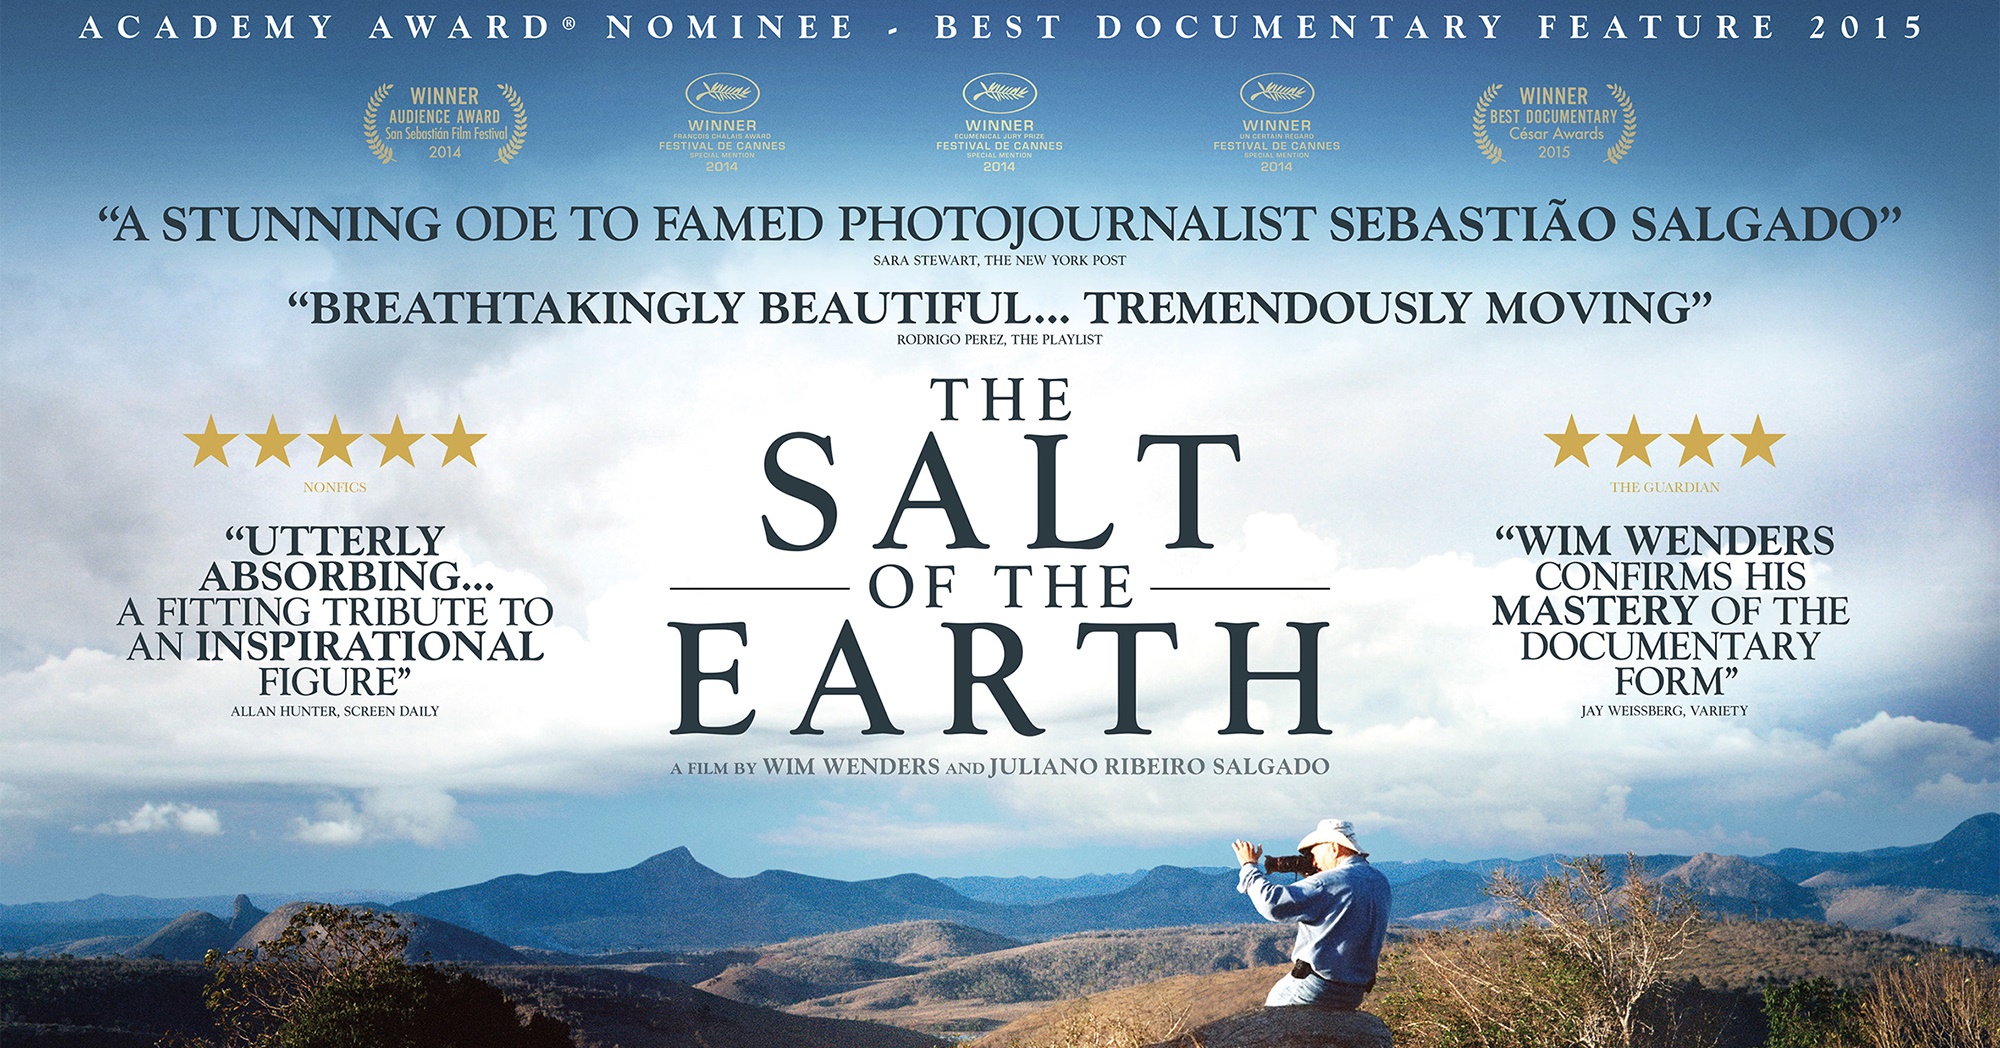 movie review salt of the earth